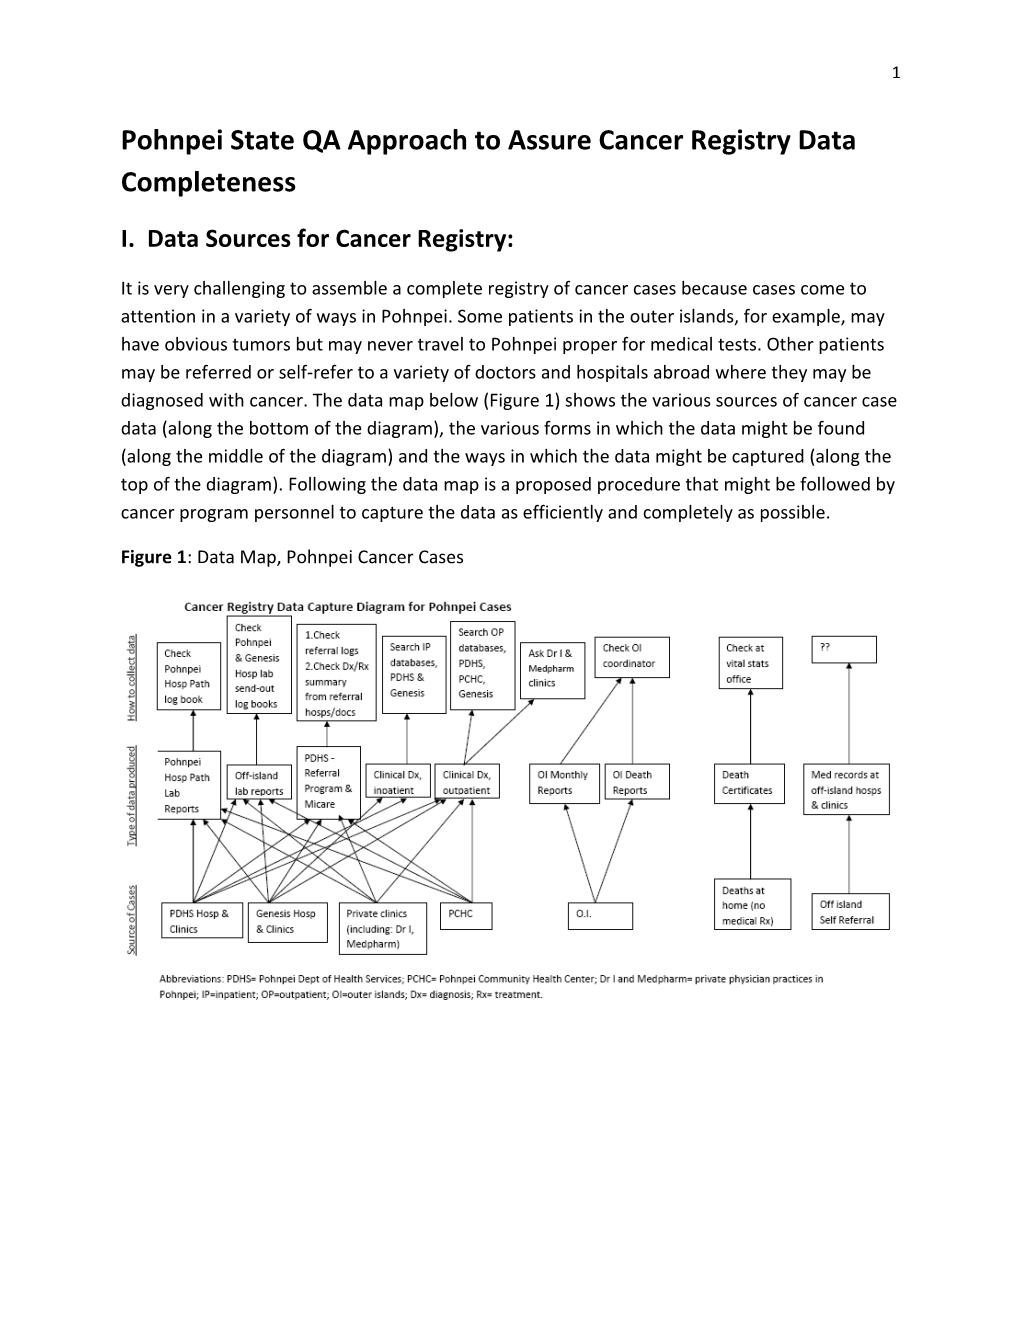 Pohnpei State QA Approach to Assure Cancer Registry Data Completeness